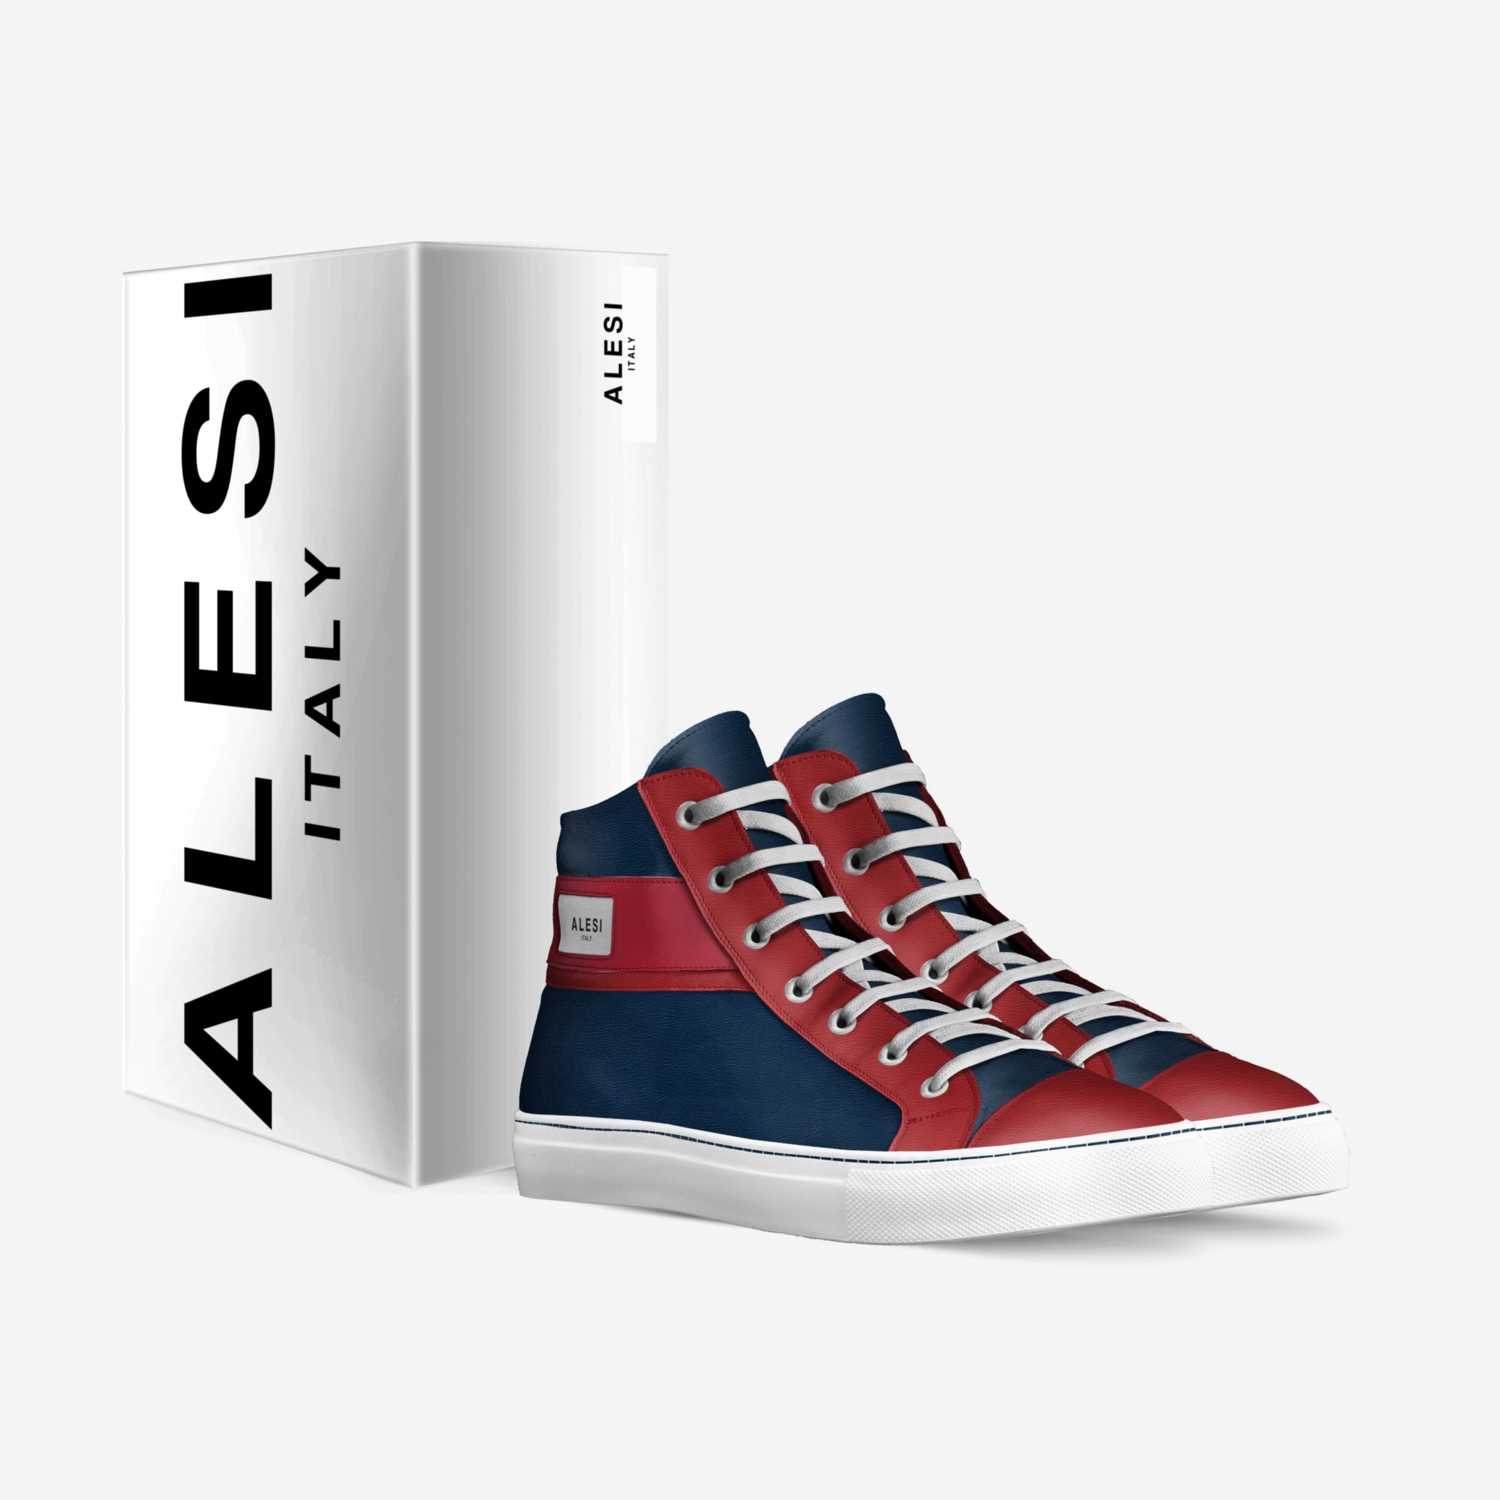 Alesi All-Star custom made in Italy shoes by Lonanthony Parker | Box view